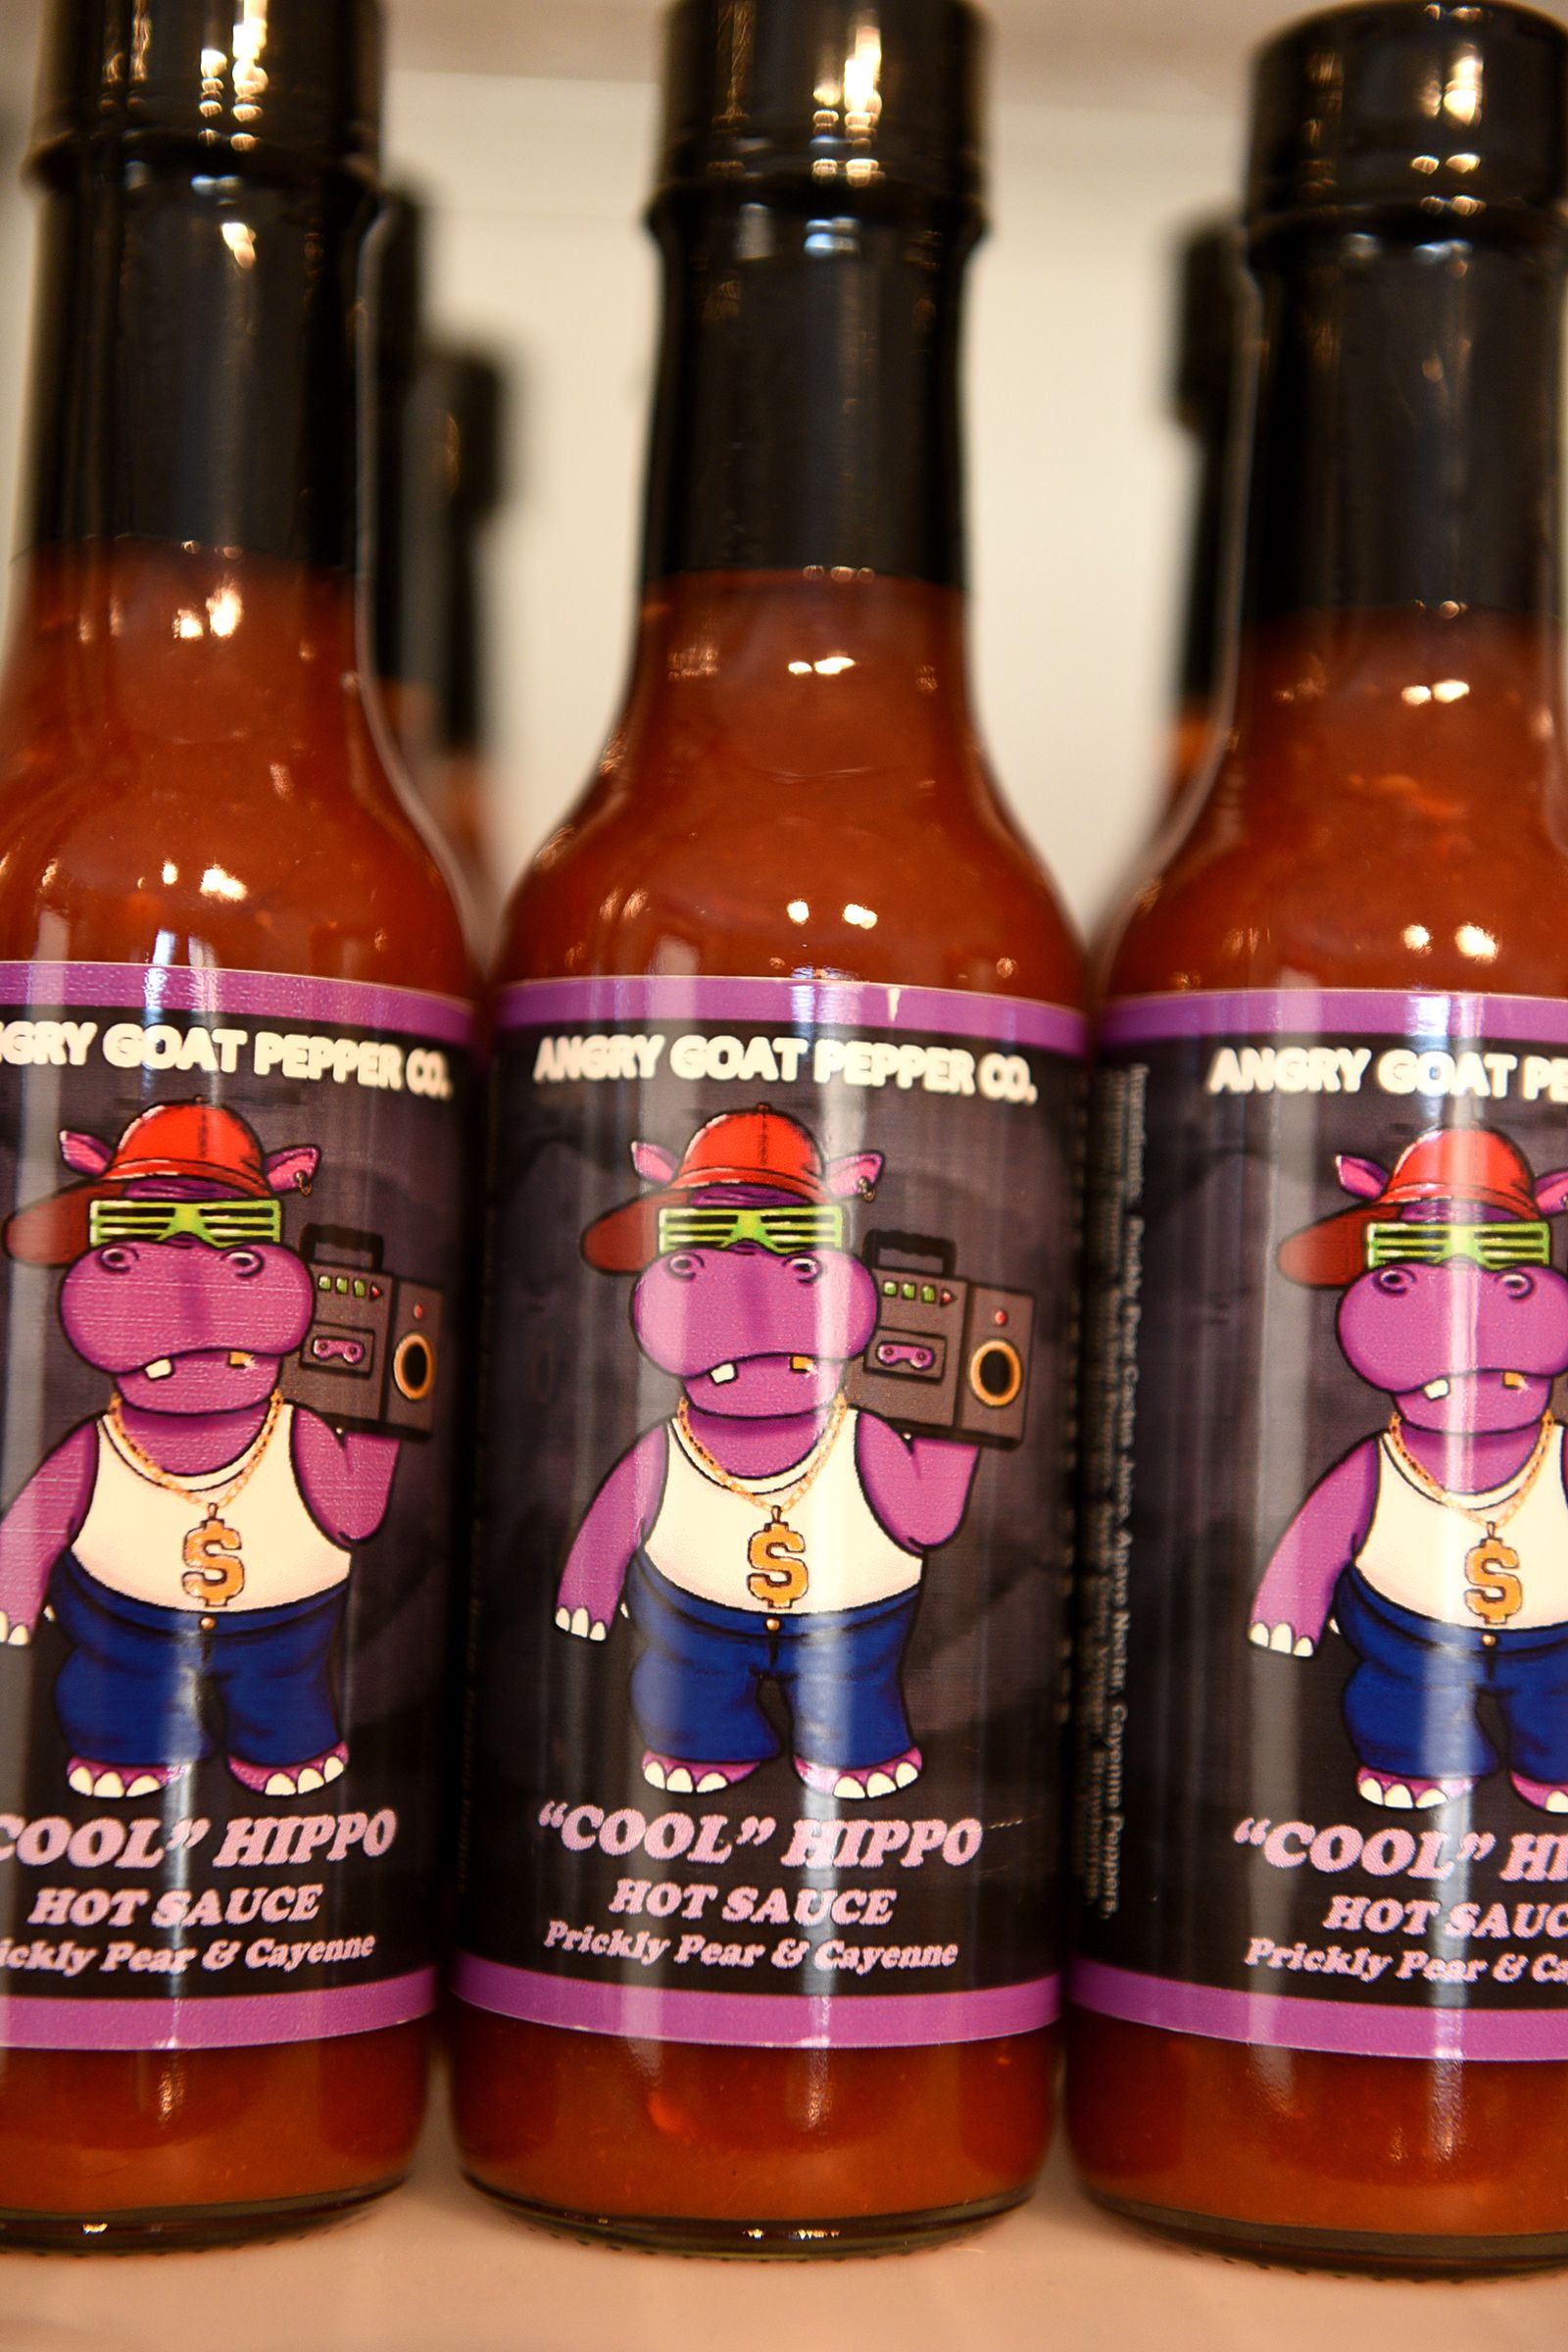 Cool Hippo Hot Sauce, with prickly pear and cayenne, is one of the many  products made